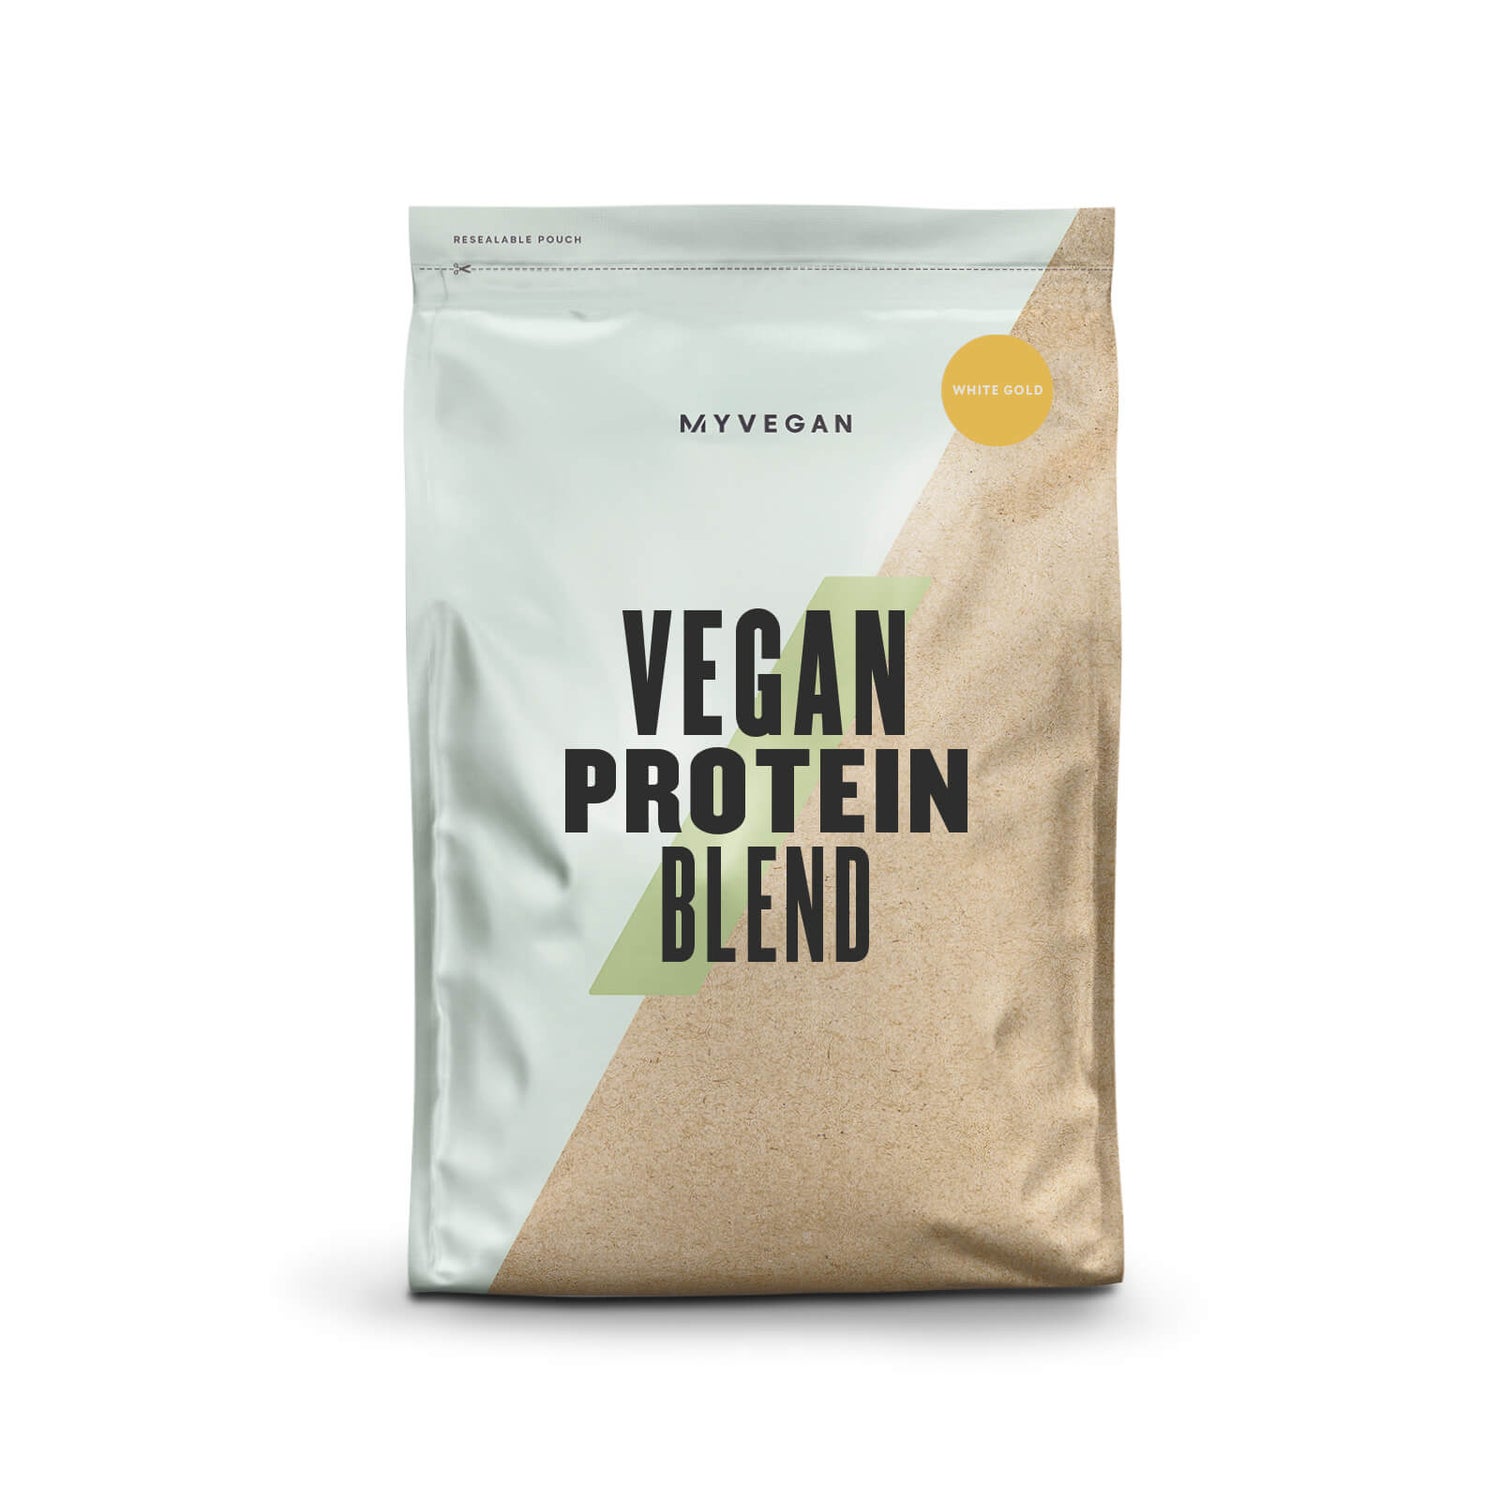 Vegan Protein Blend - White Gold (Limited Edition)